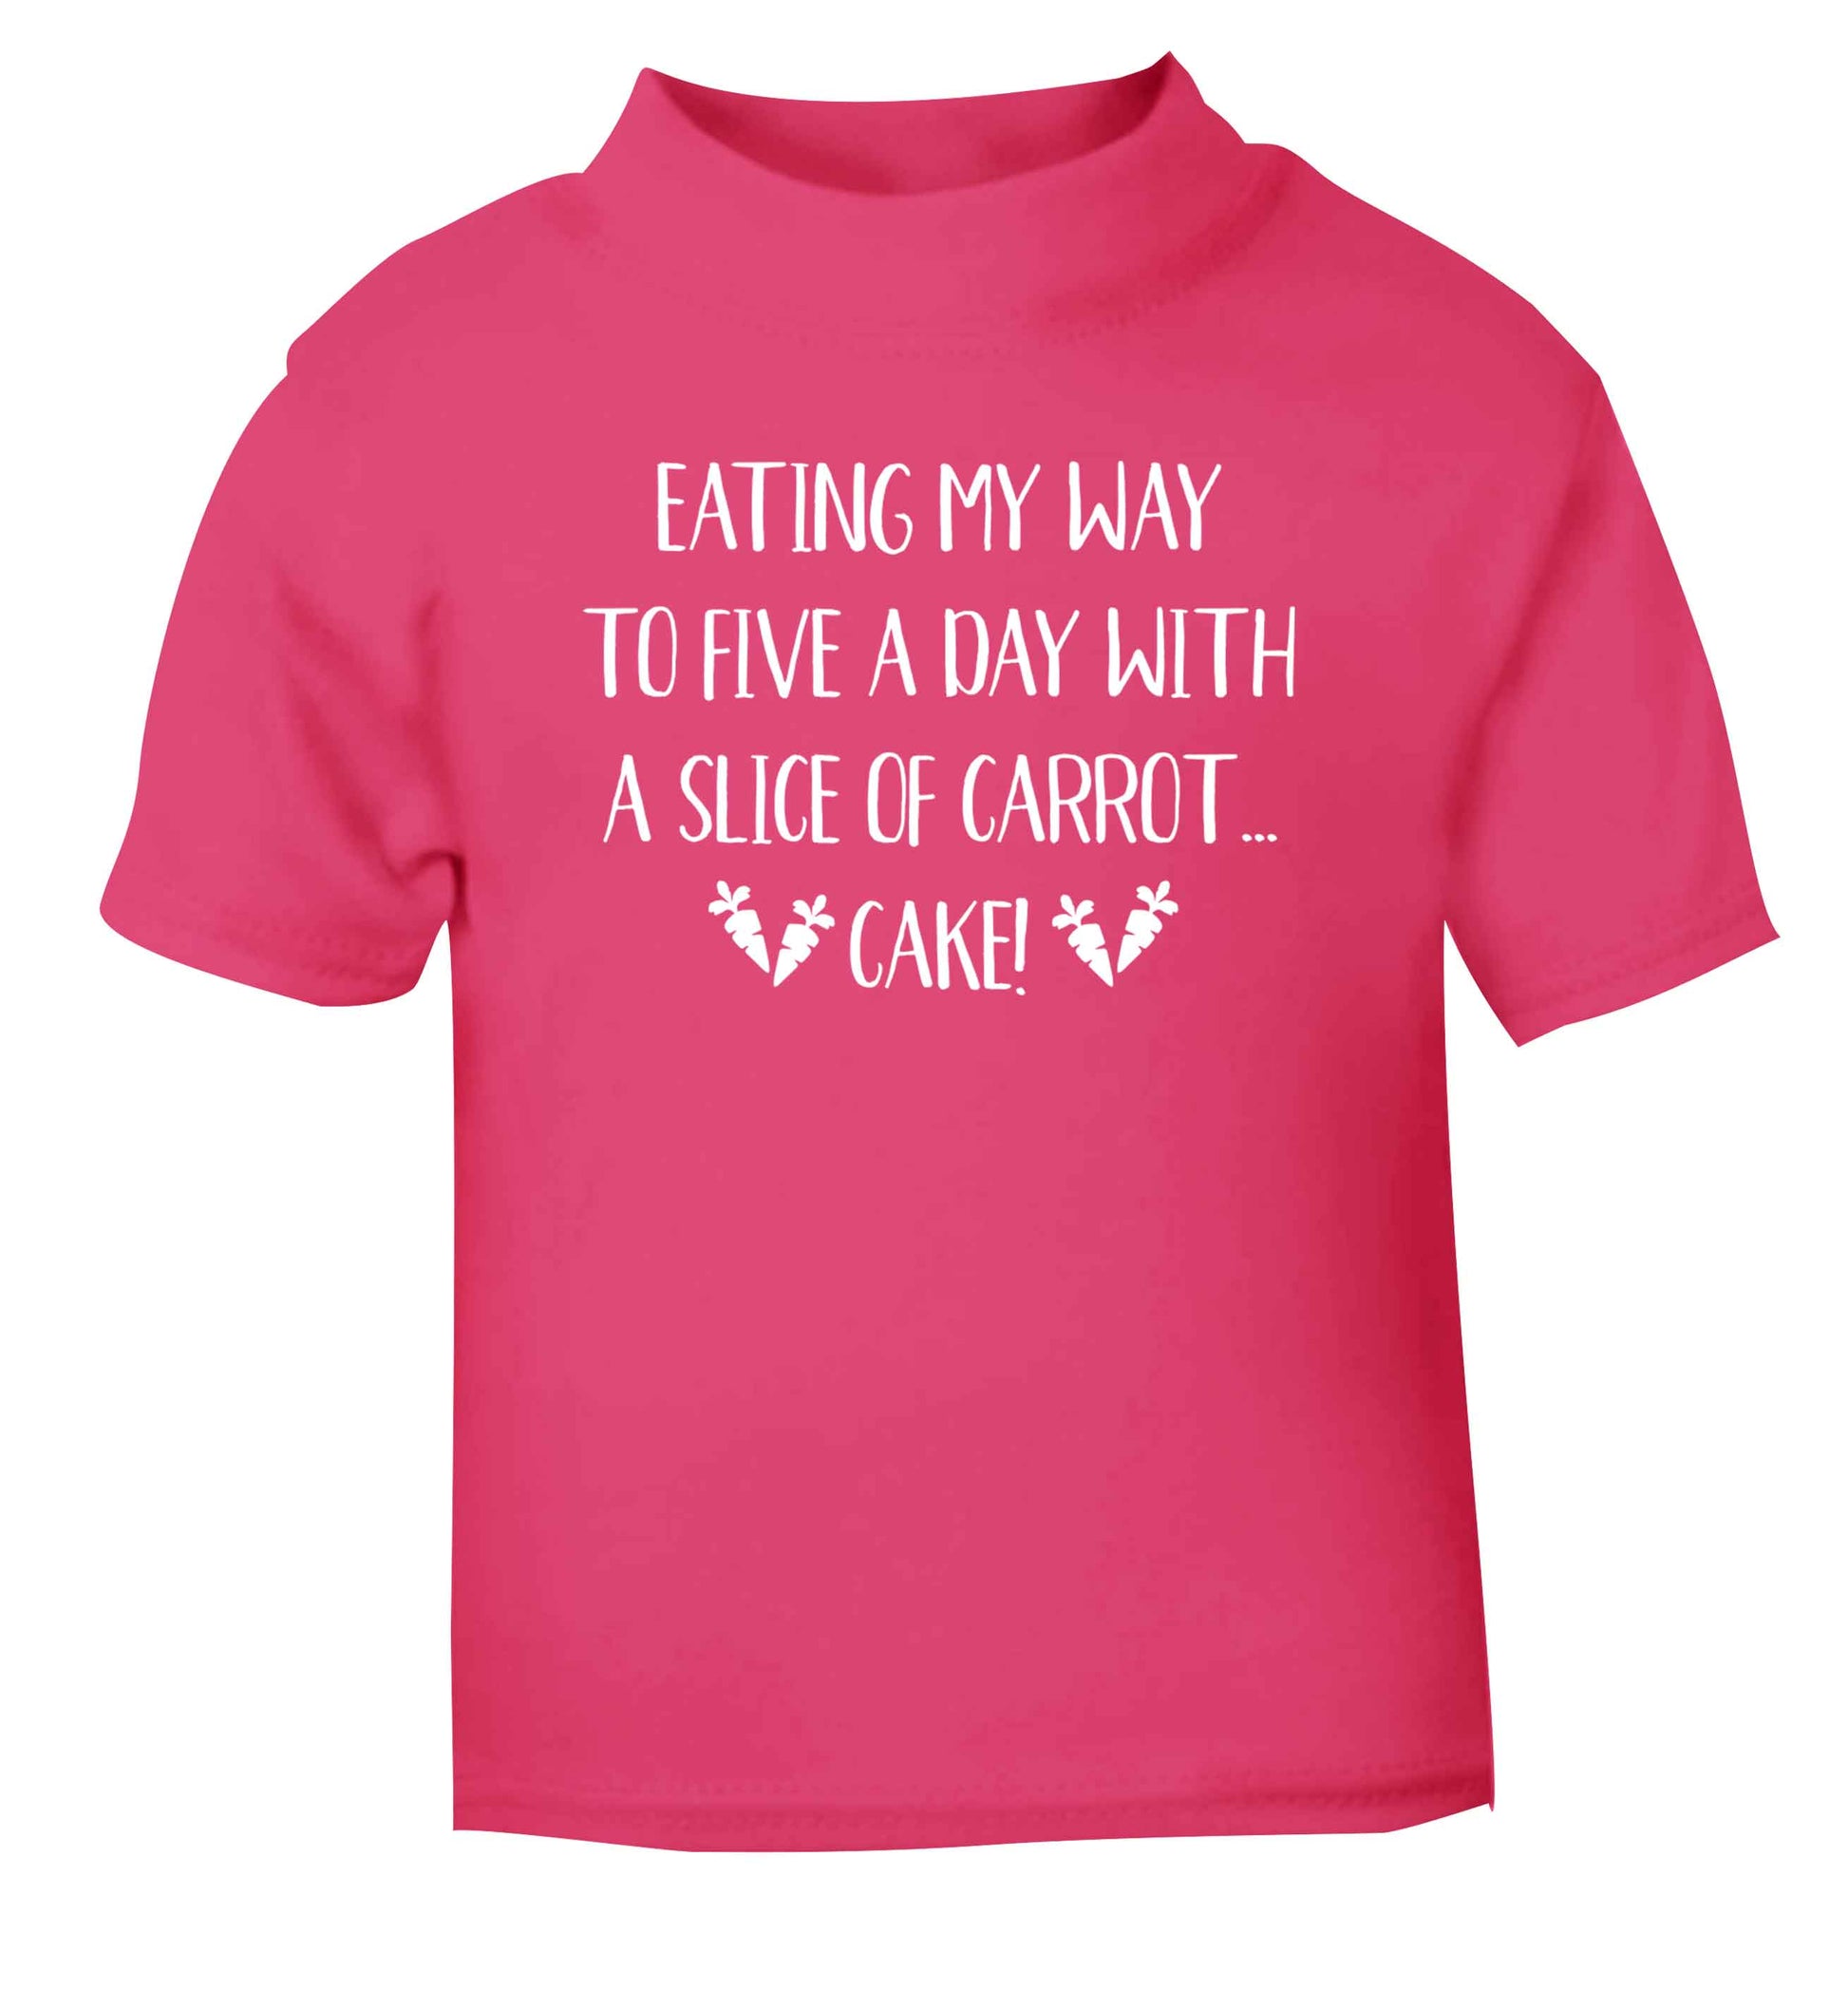 Eating my way to five a day with a slice of carrot cake day pink Baby Toddler Tshirt 2 Years